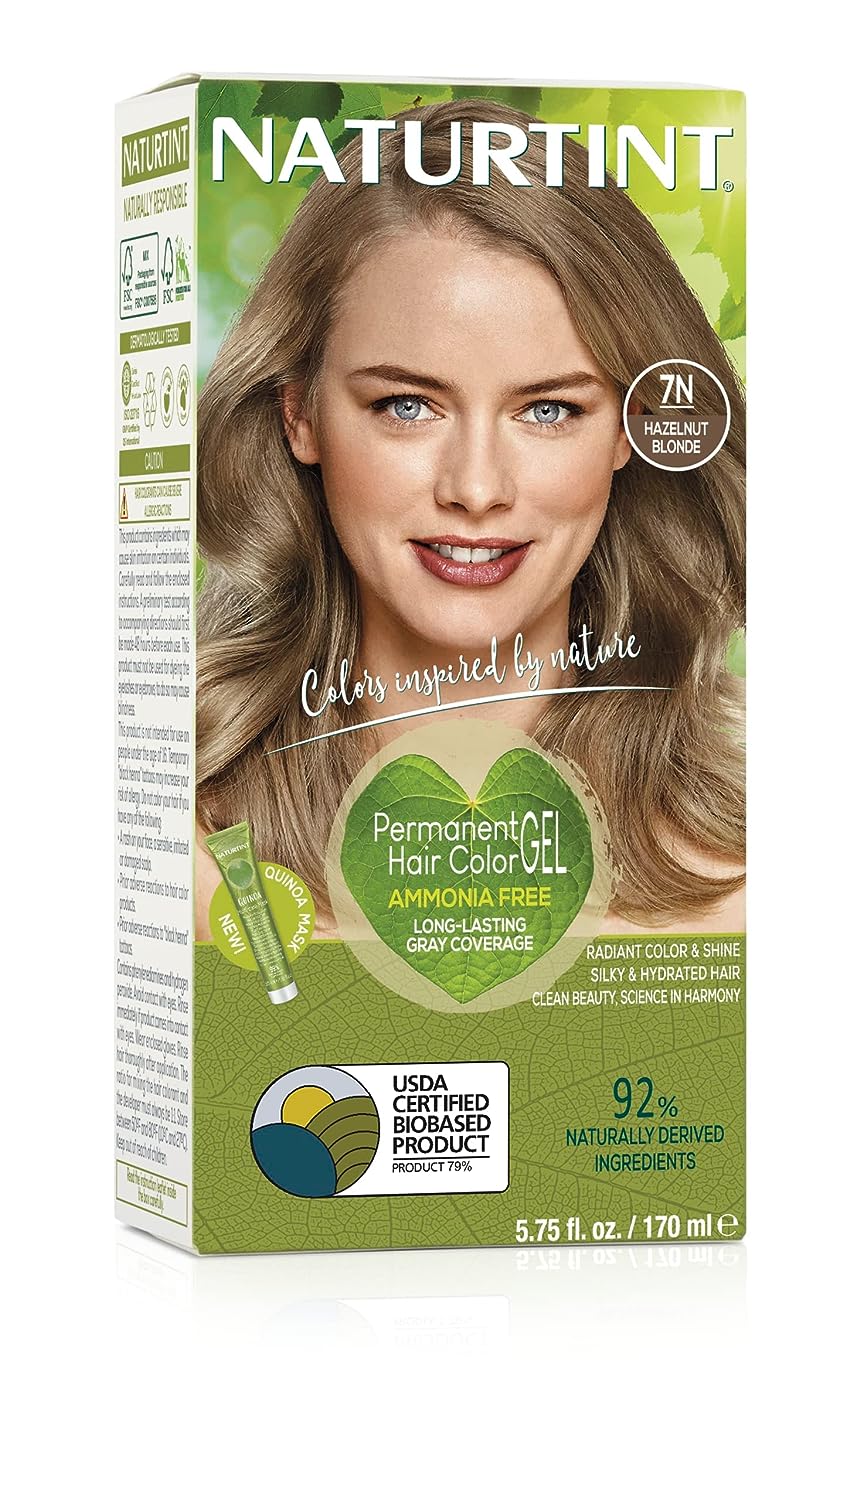 Naturtint Permanent Hair Color 7N Hazelnut Blonde (Pack of 1)